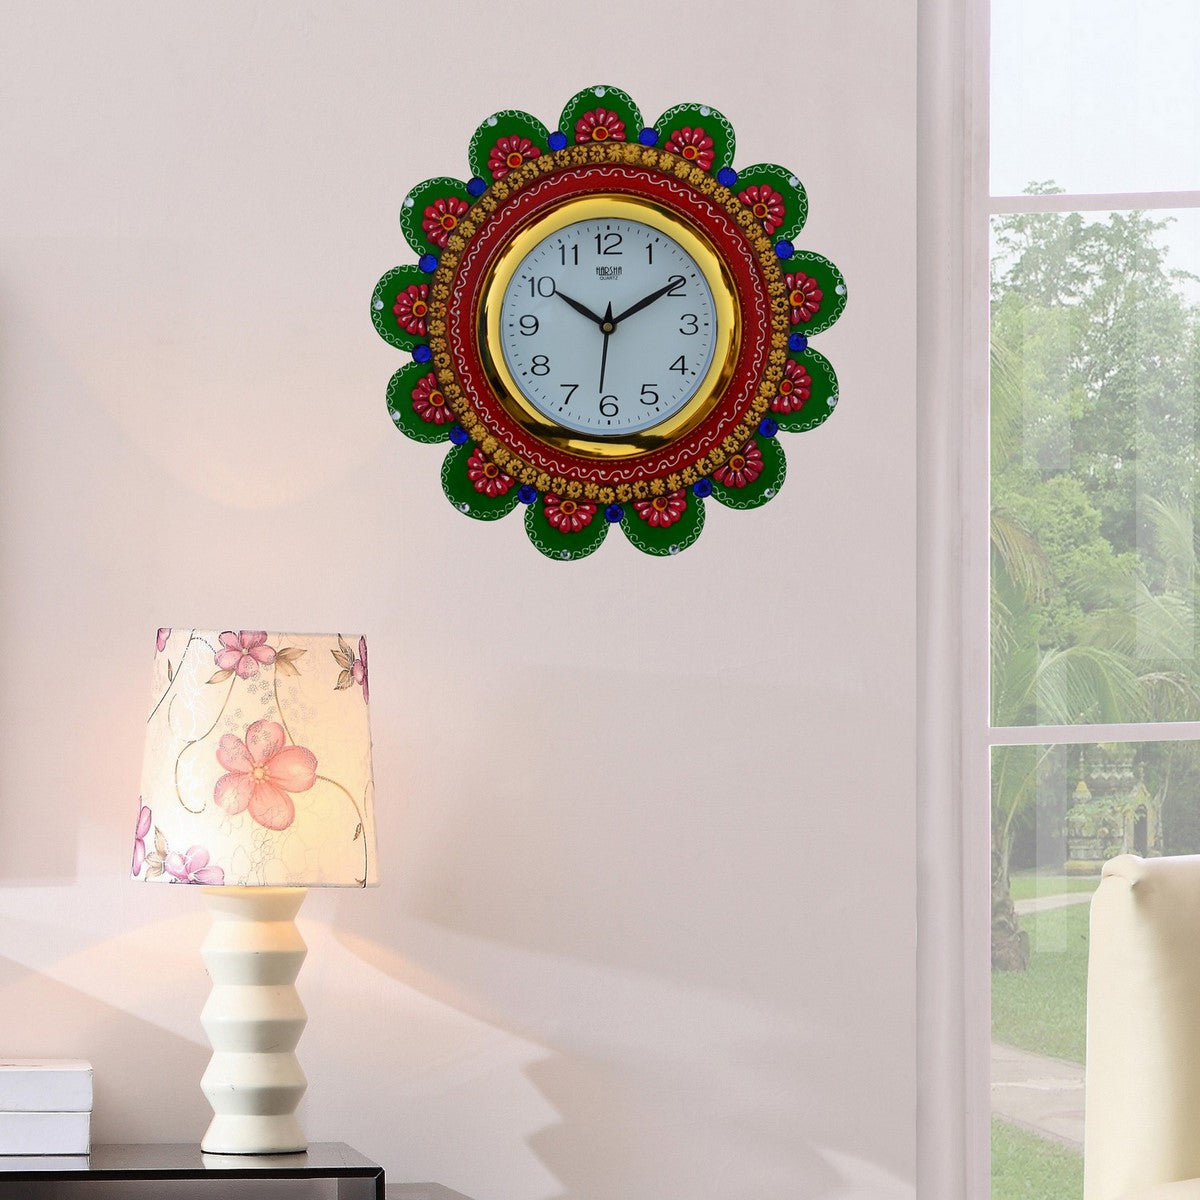 Papier-Mache Sublime Round Handcrafted Wall Clock 2